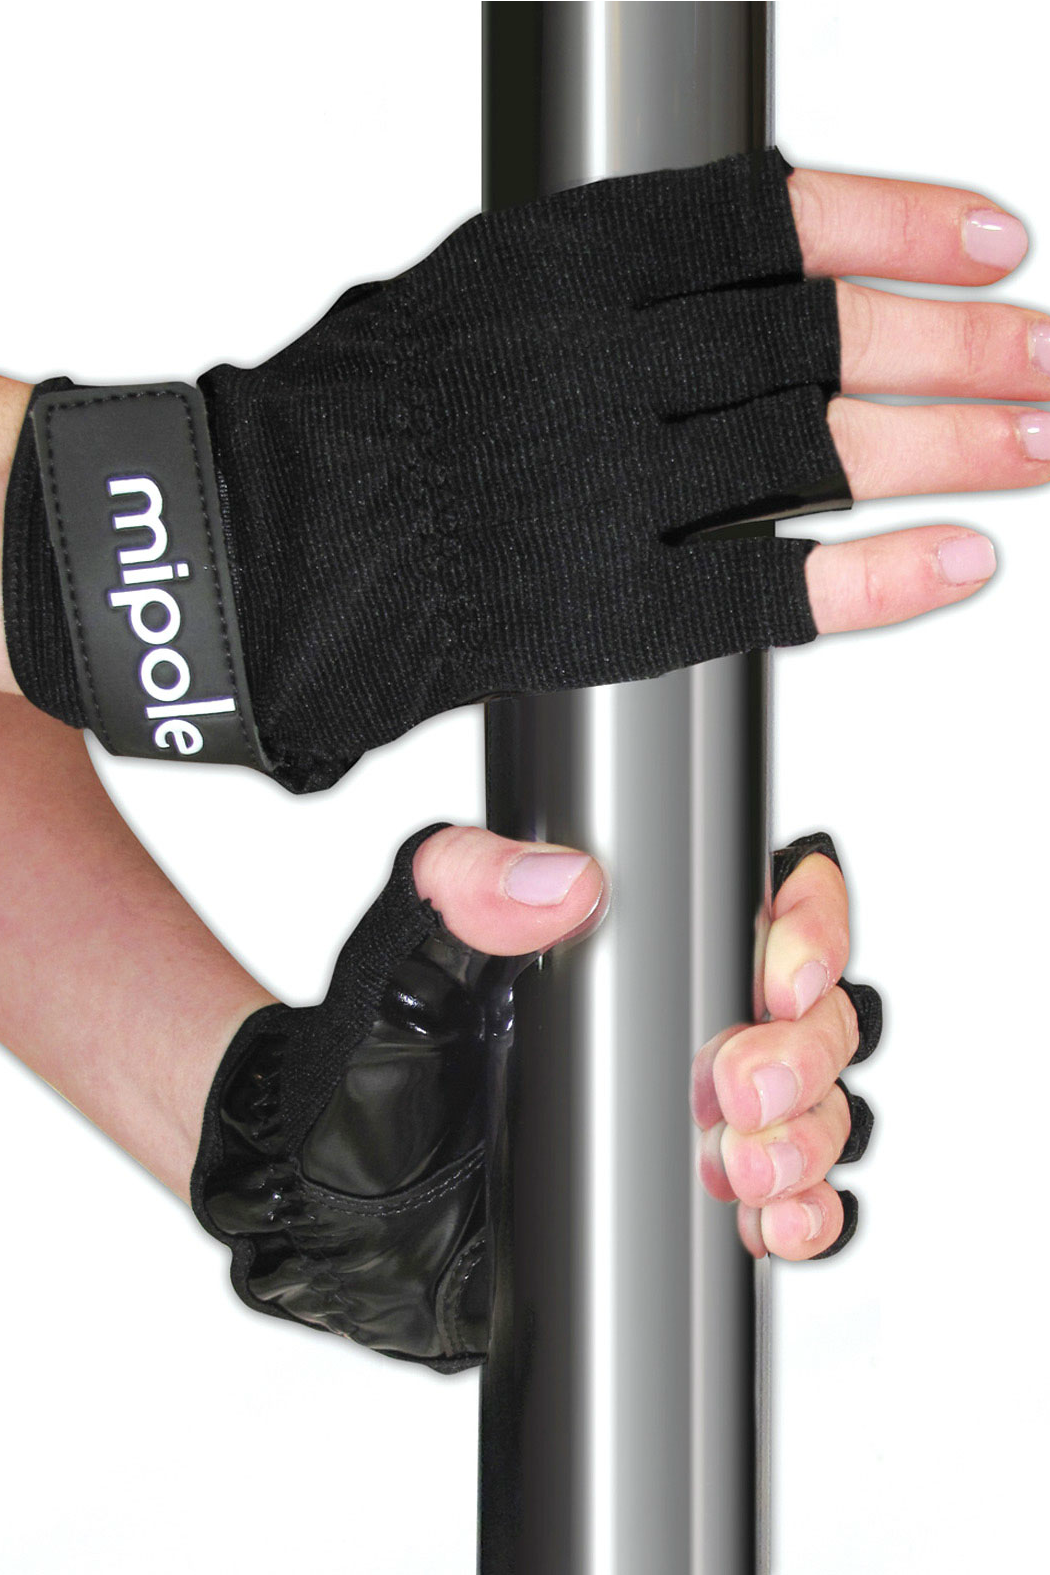 MiPole Grip Aid Pole Dancing Gloves